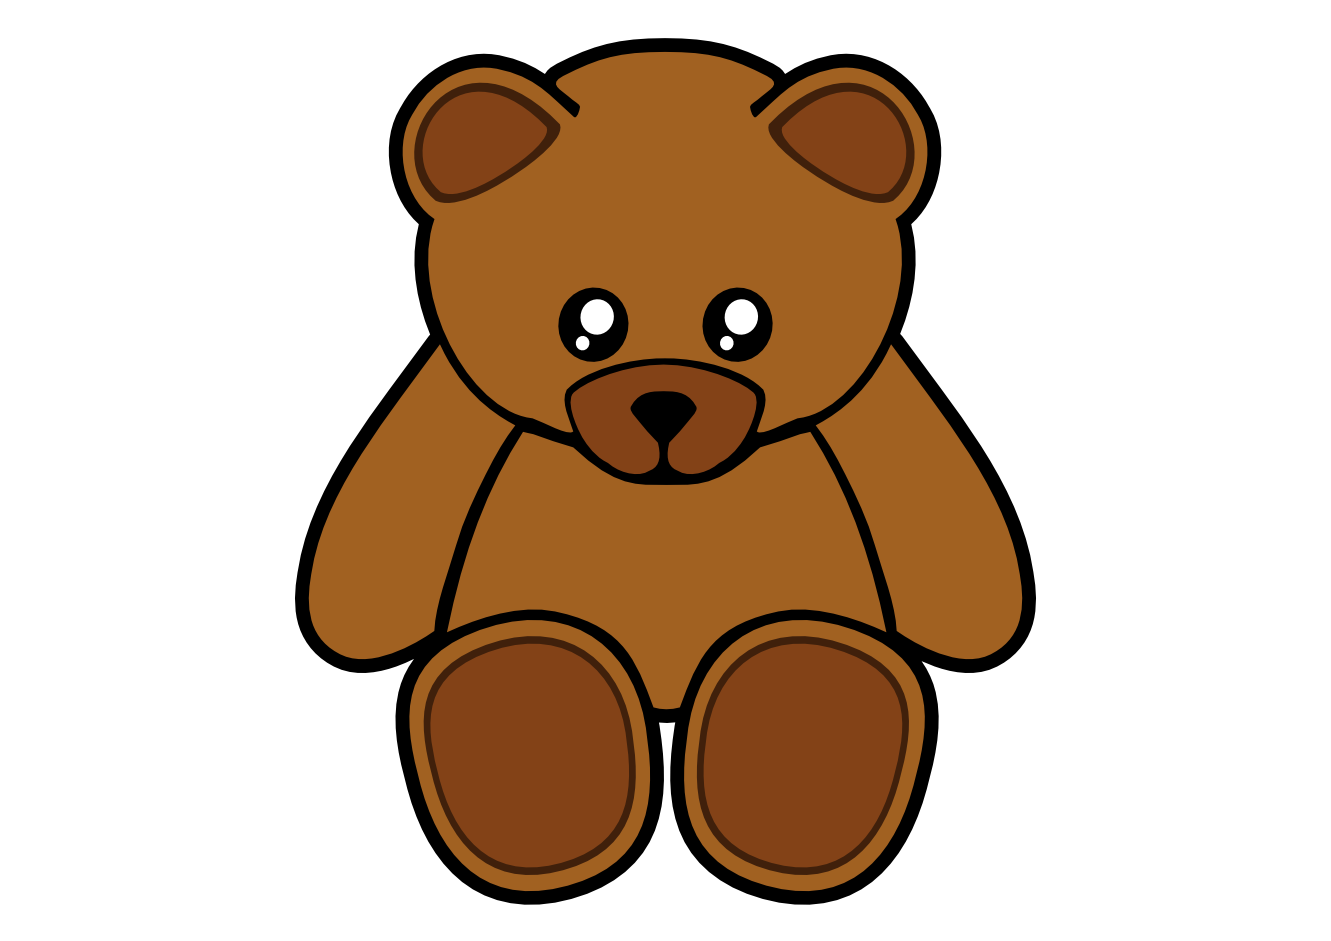 Free Teddy Bear Transparent Background, Download Free Clip